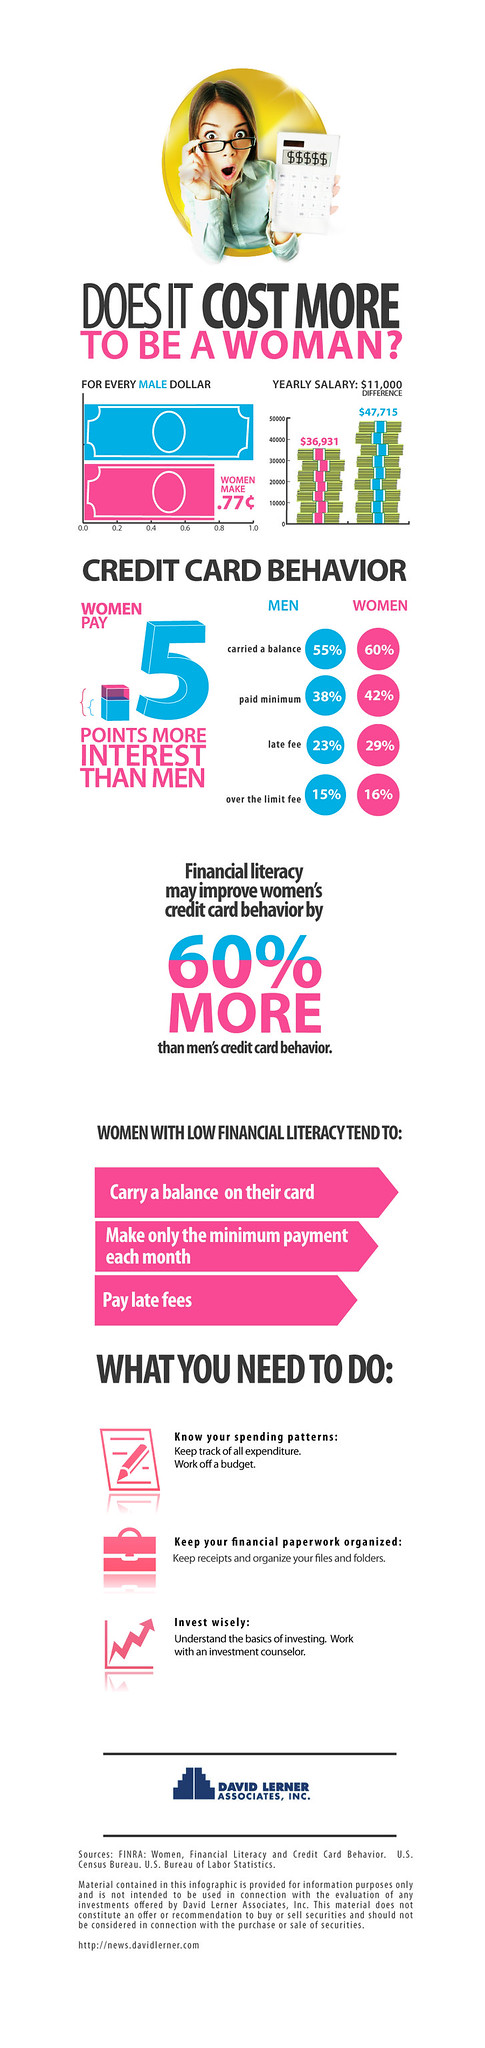 Infographic of the FINRA study on women and money